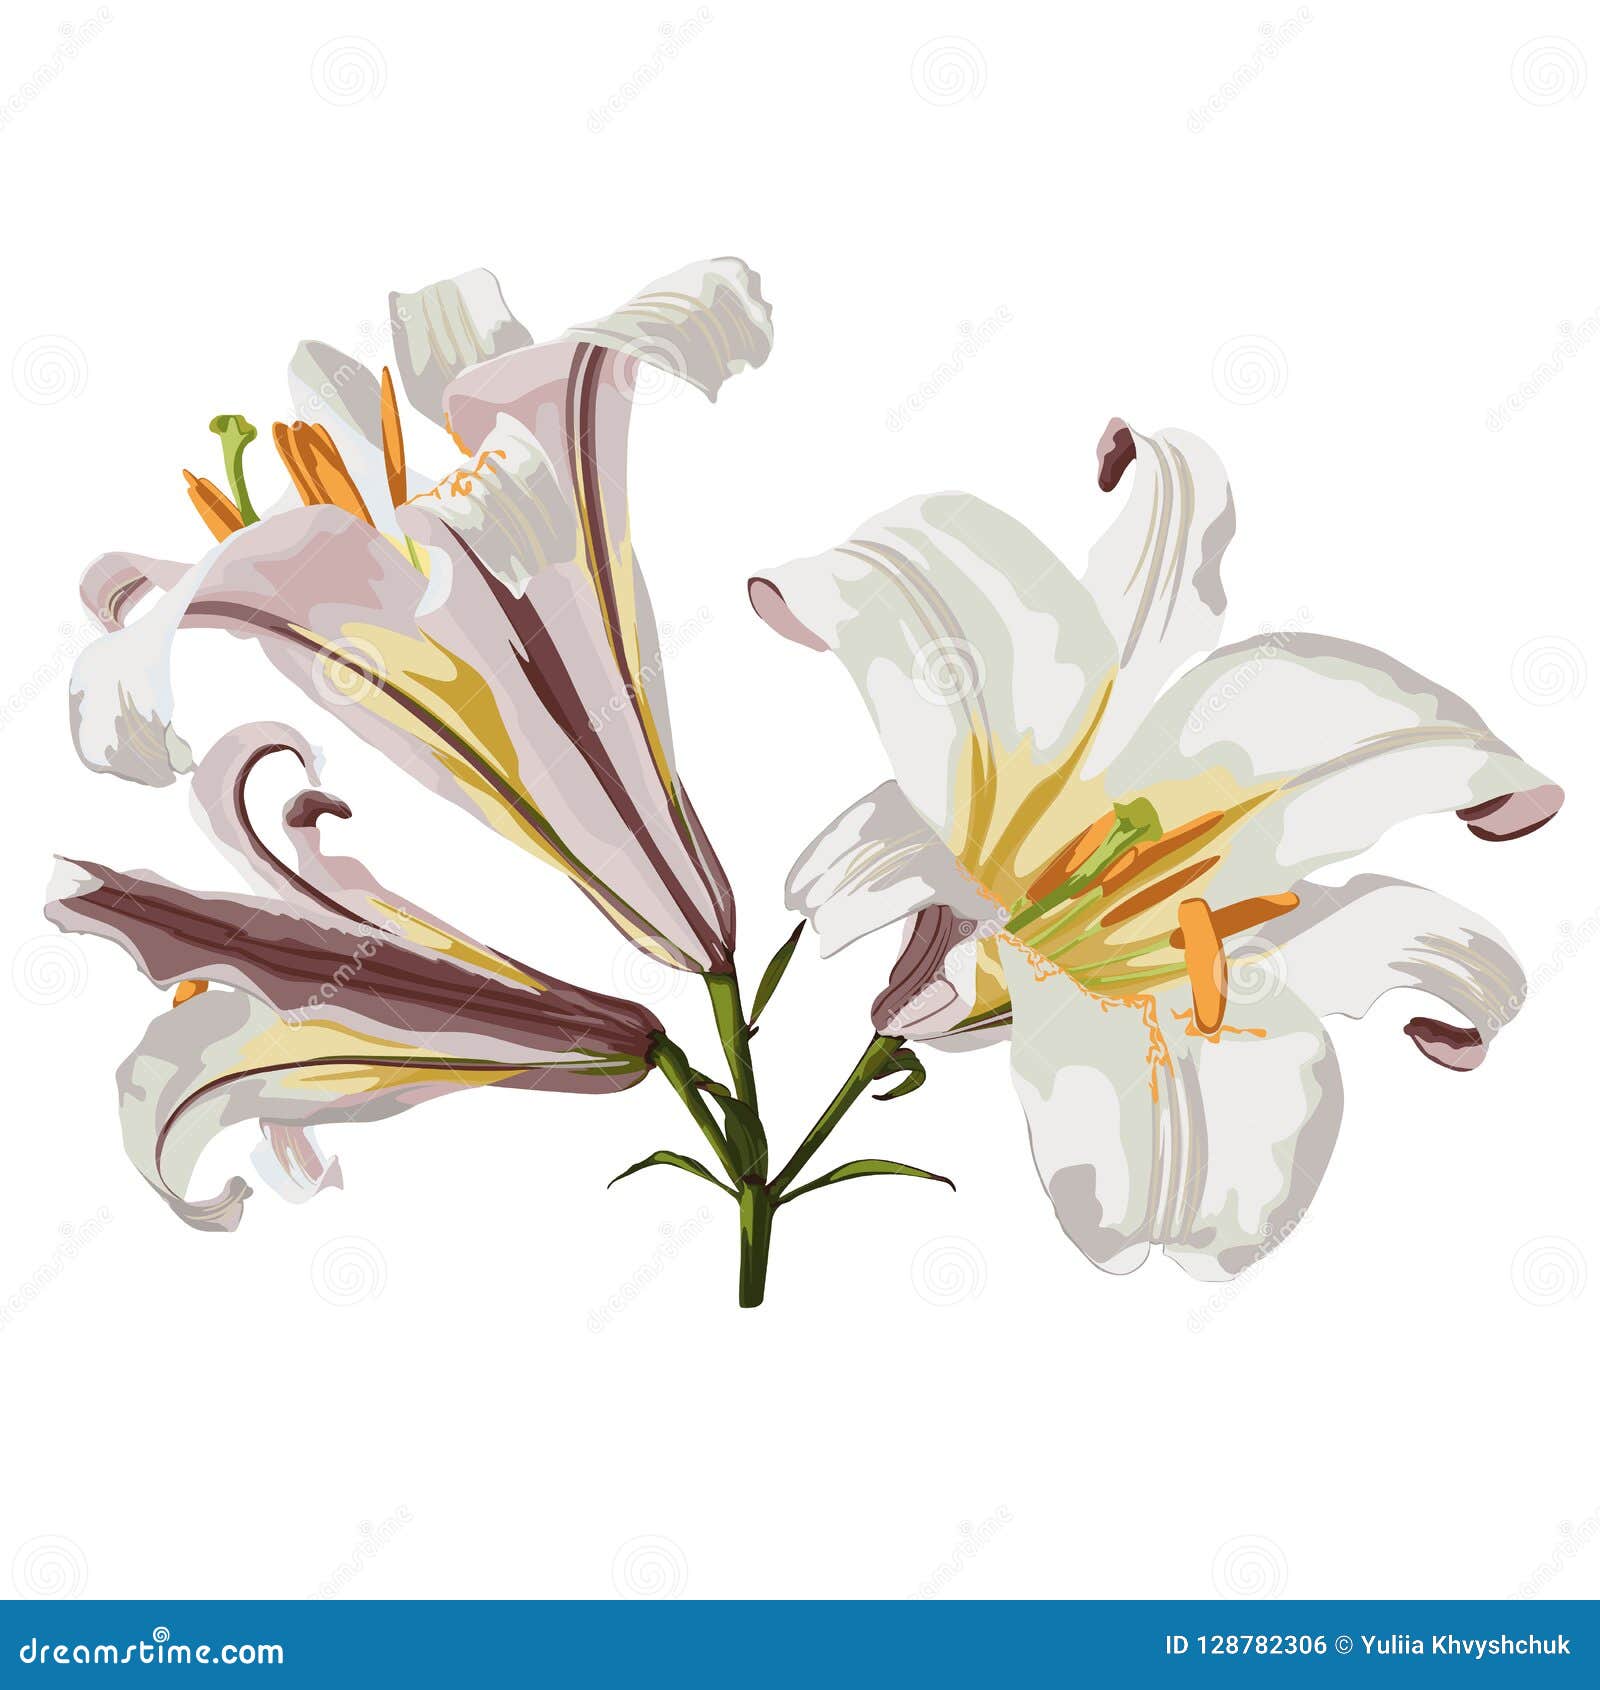 Realistic Lily Drawing, Realistic Lily Flower Sketch, Outline Realistic ...